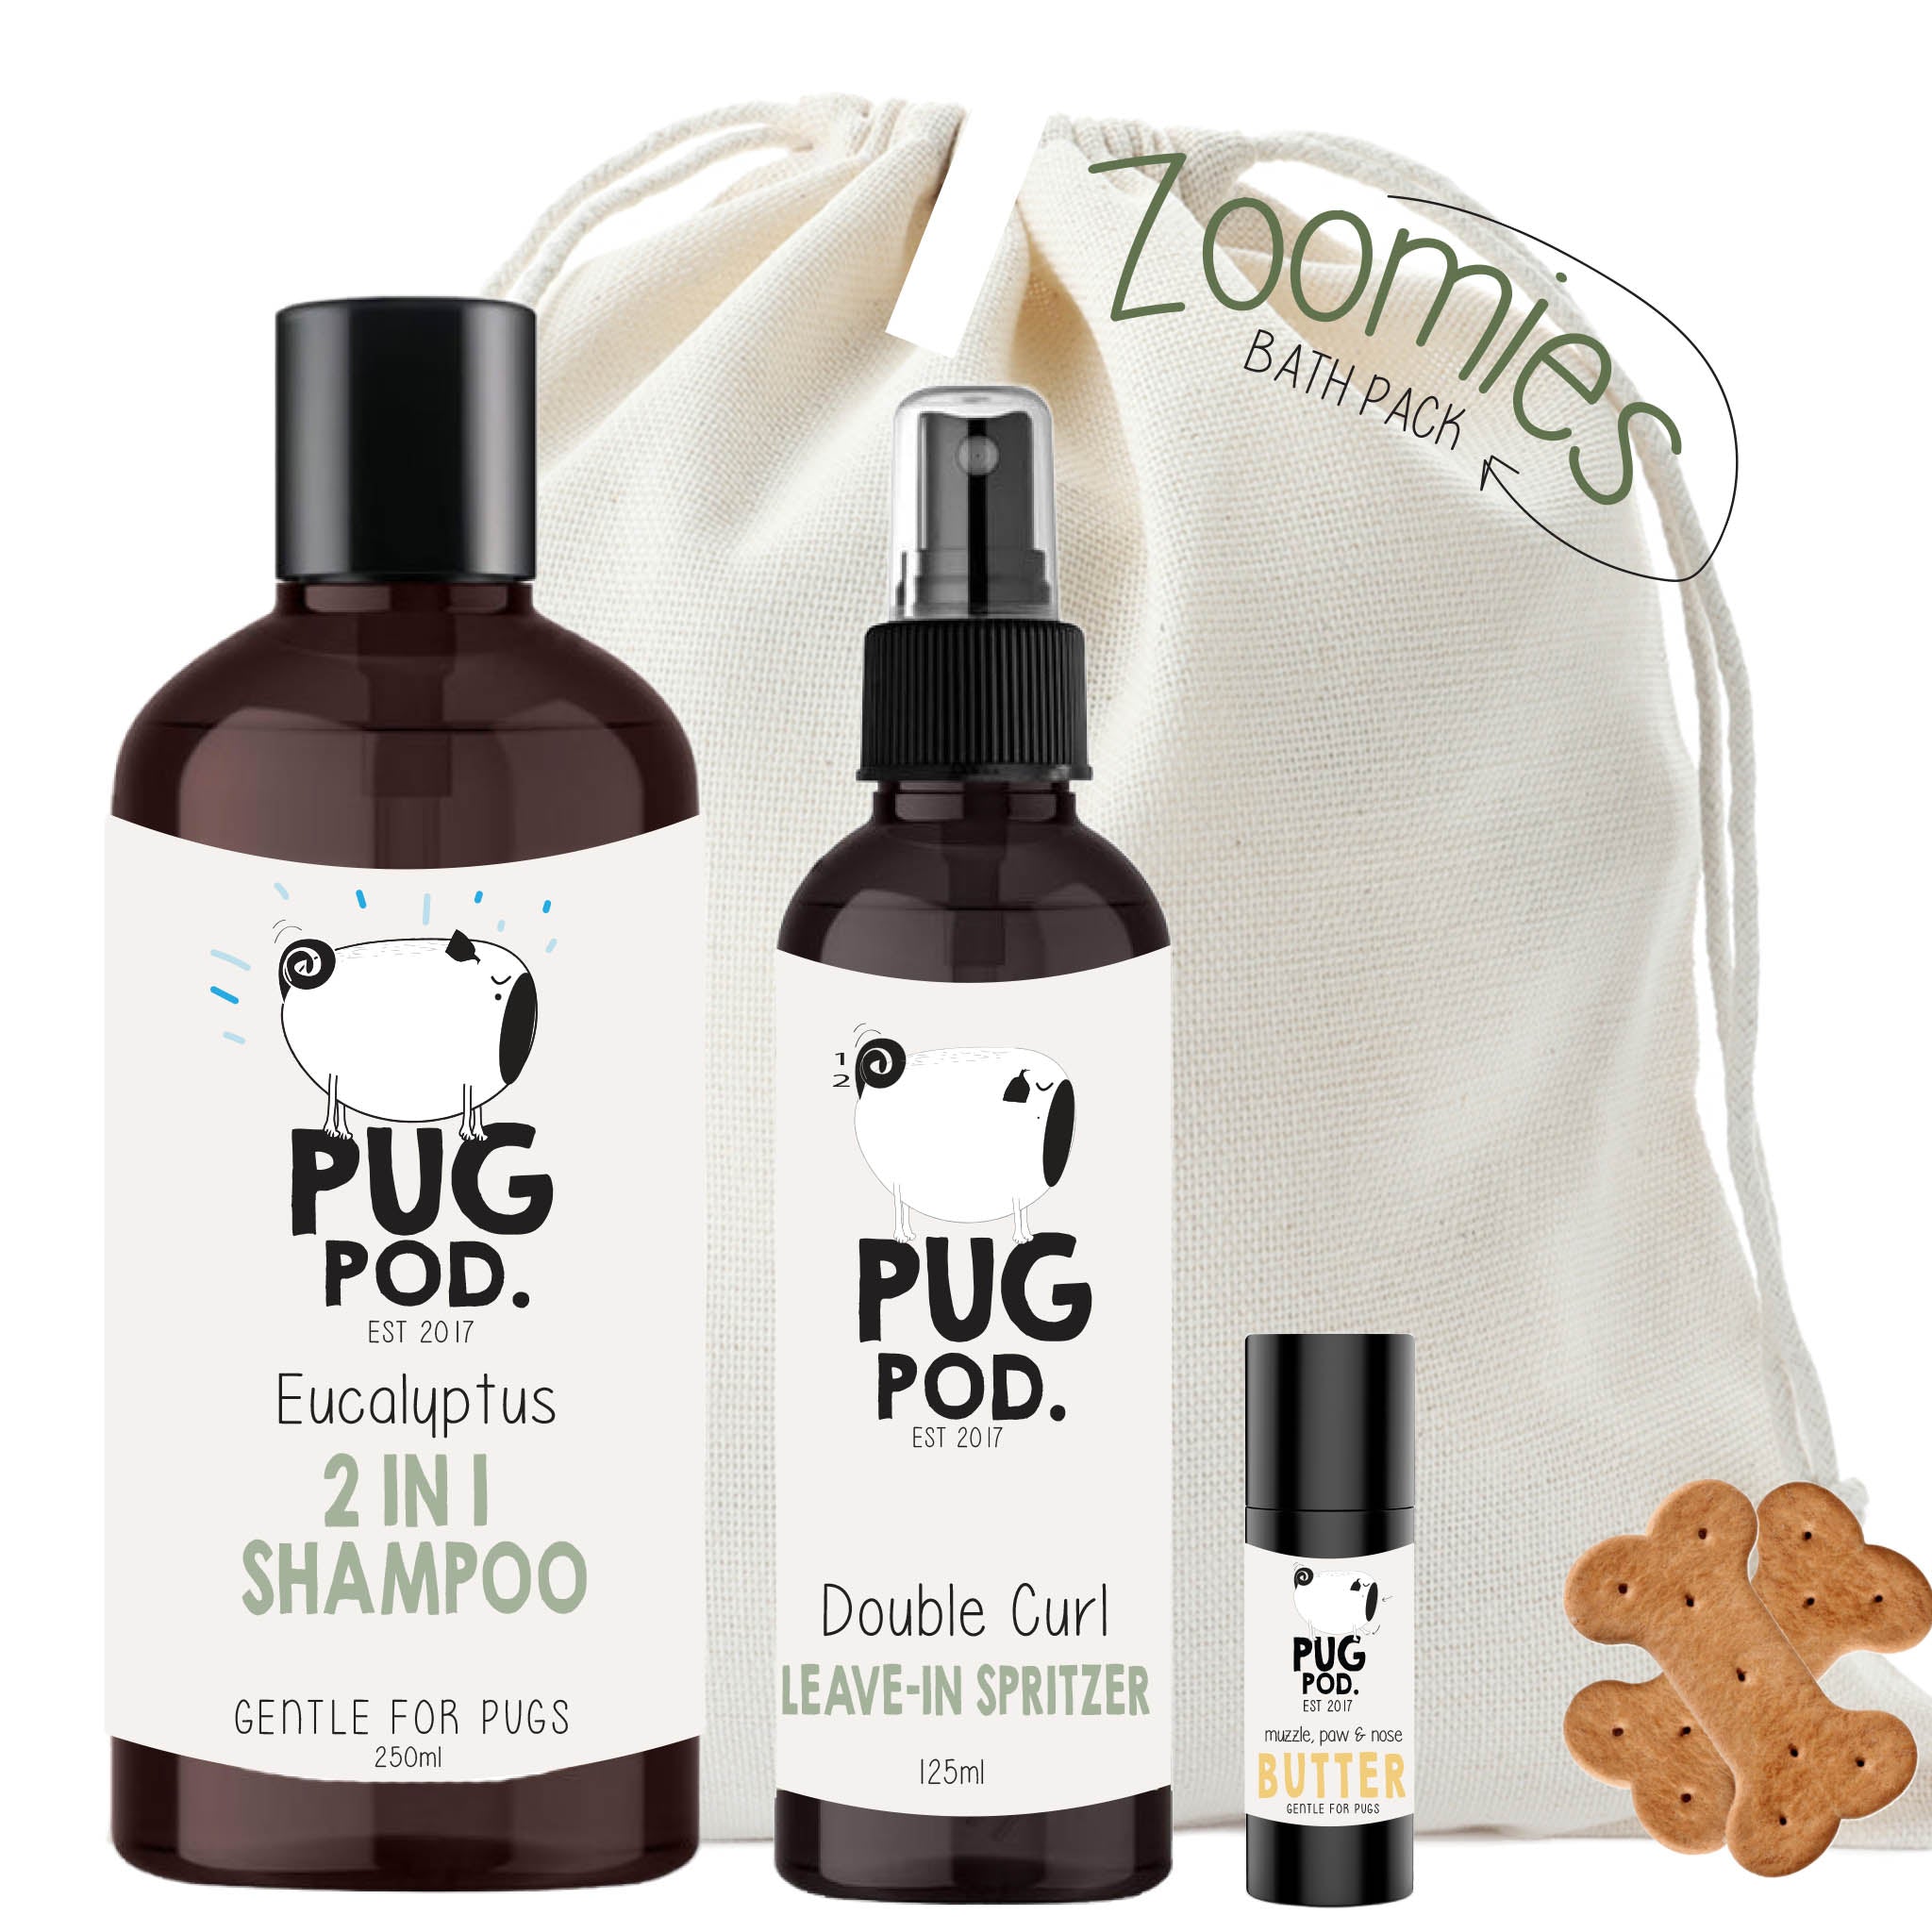 Pug dog zoomies bath pack, containing shampoo, spritzer,balm butter and a dog biscuit -front